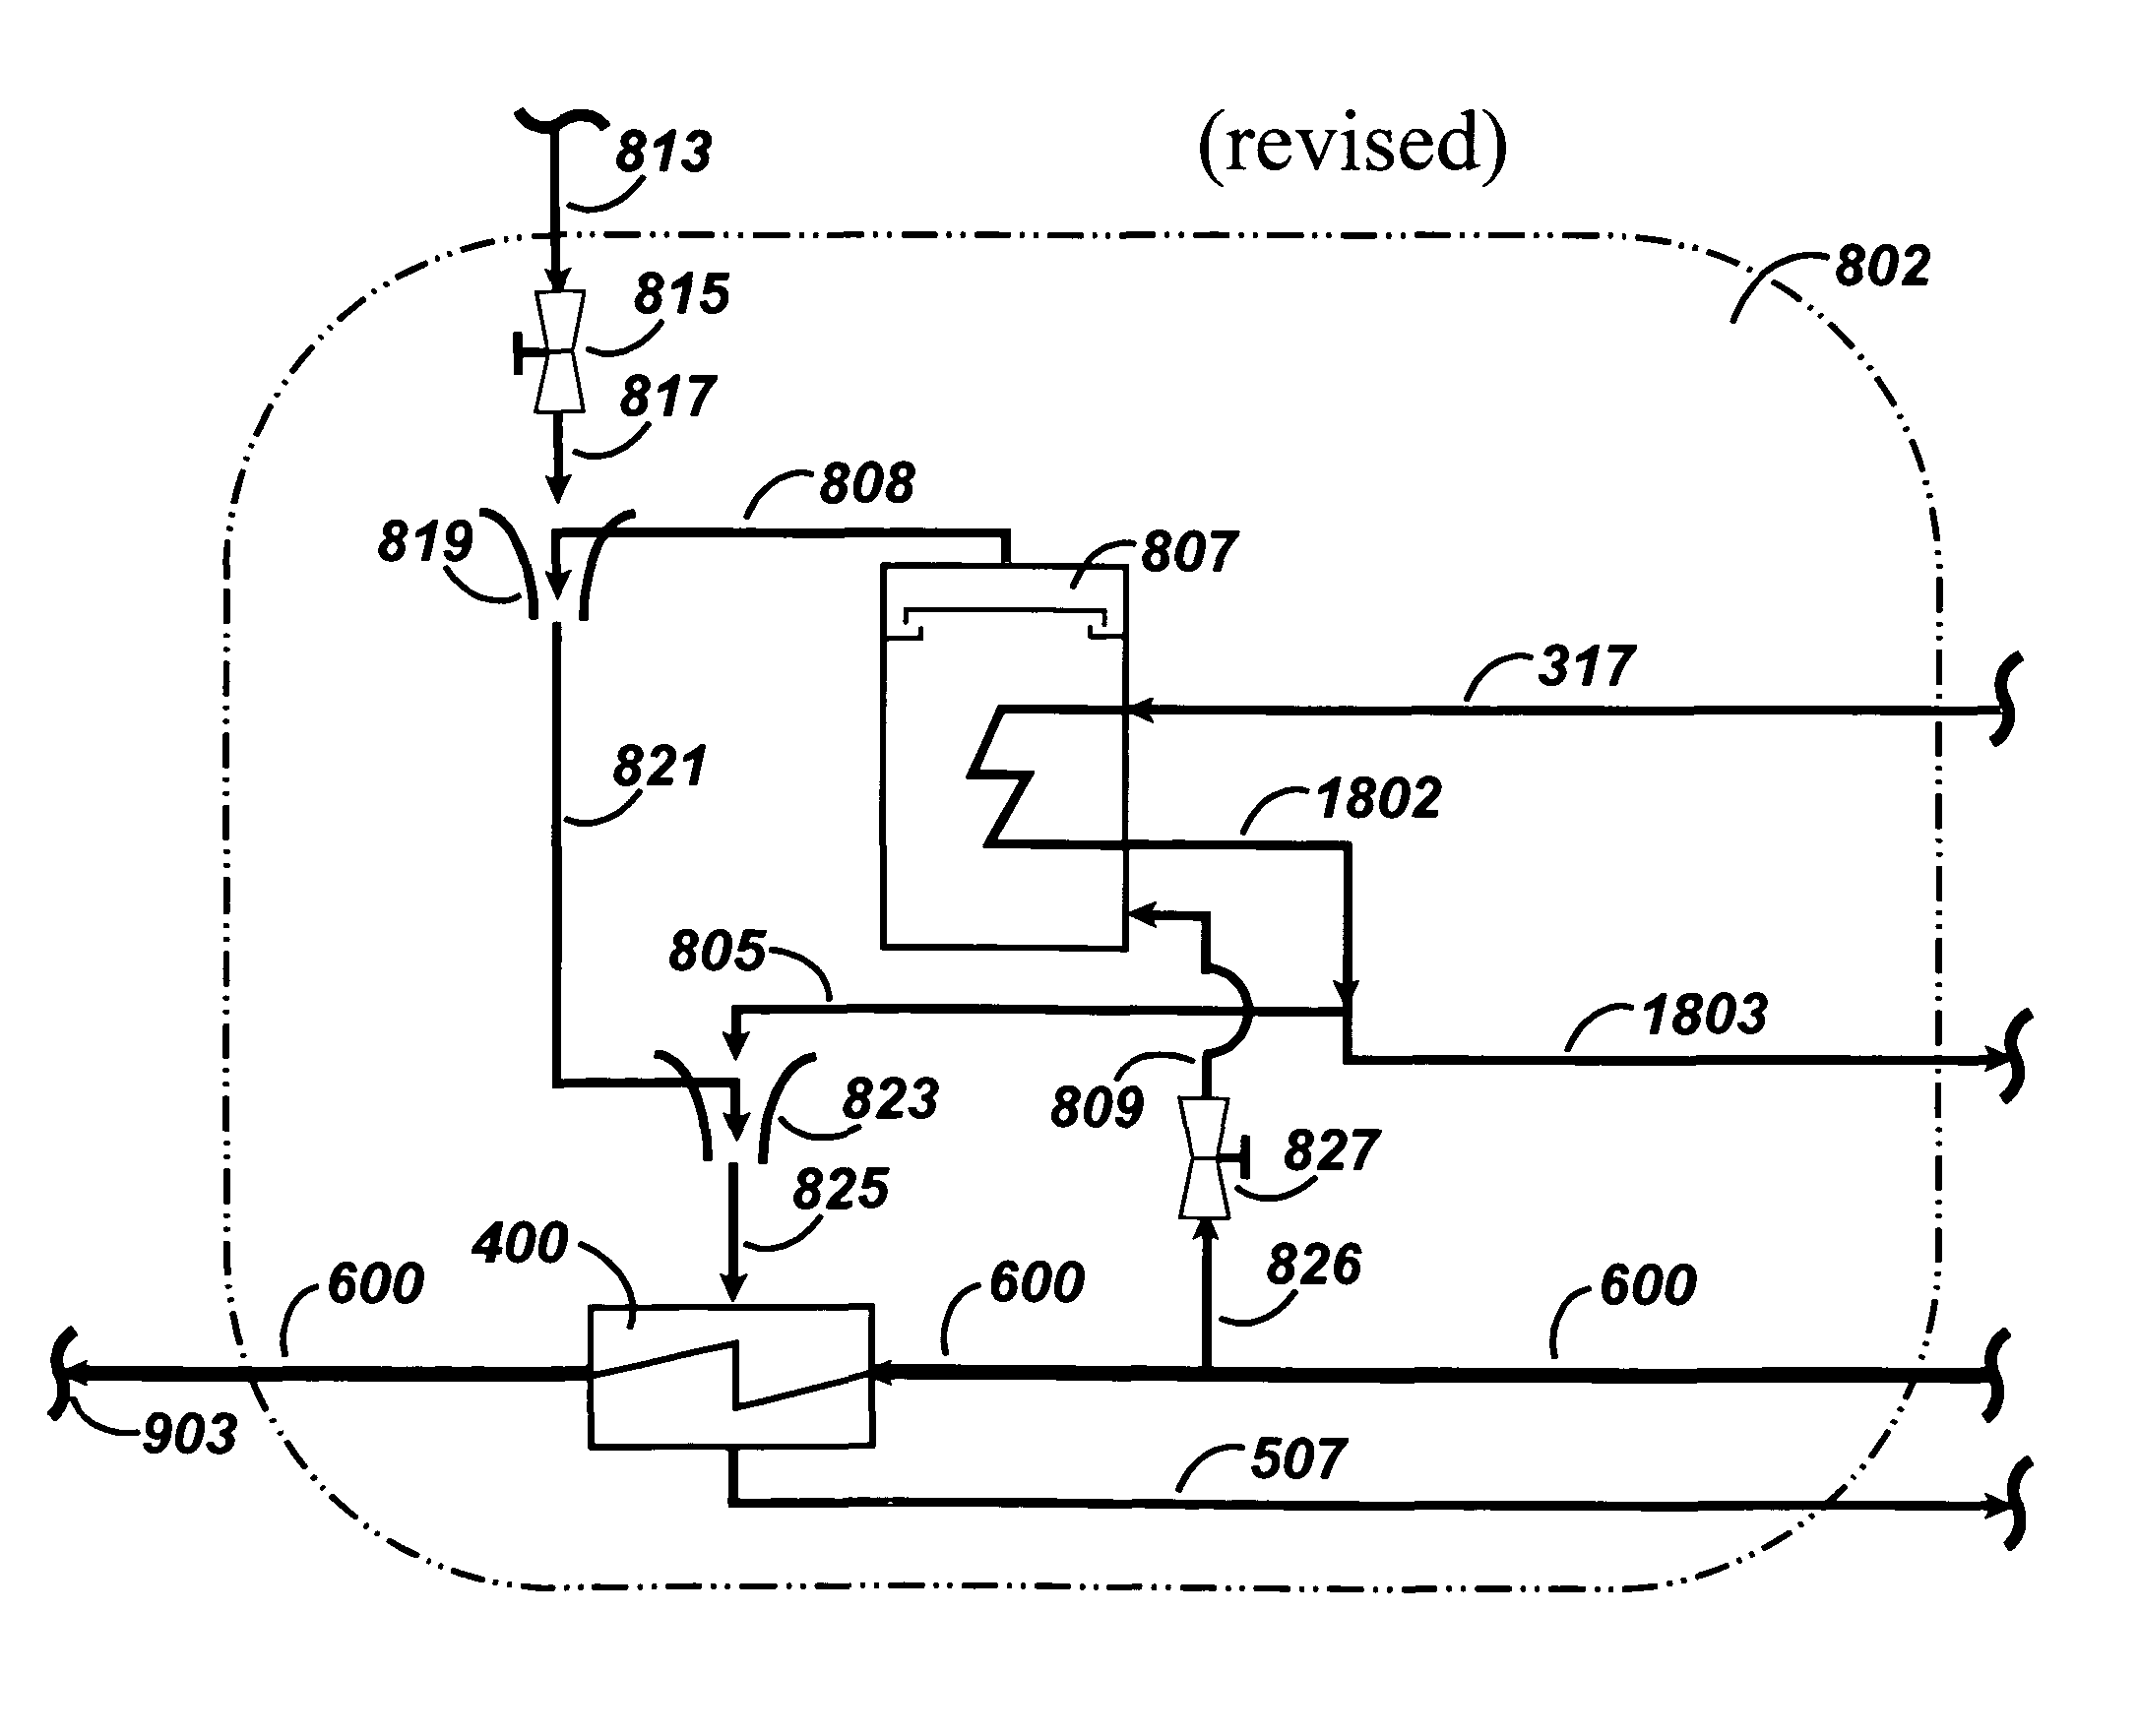 Method and apparatus for controlling the final feedwater temperature of a regenerative Rankine cycle using an exergetic heater system